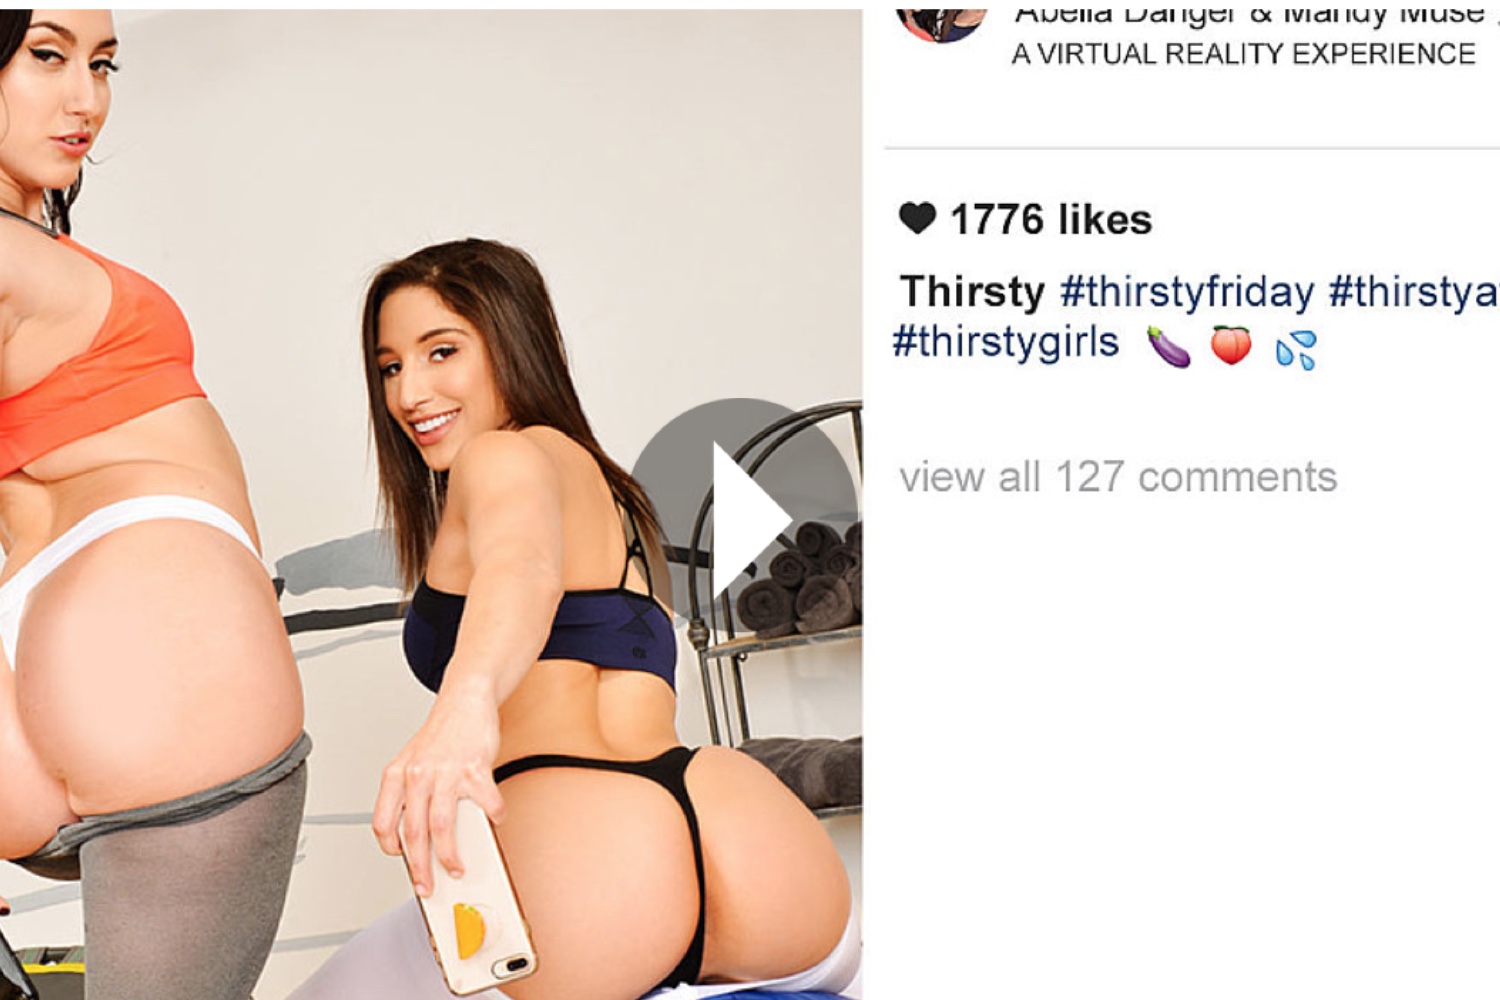 Abella Danger and Mandy Muse - Naughty America VR - Abella Danger Virtual Reality Porn - Mandy Muse Virtual Reality Porn - Abella Danger VR Porn - Mandy Muse VR Porn